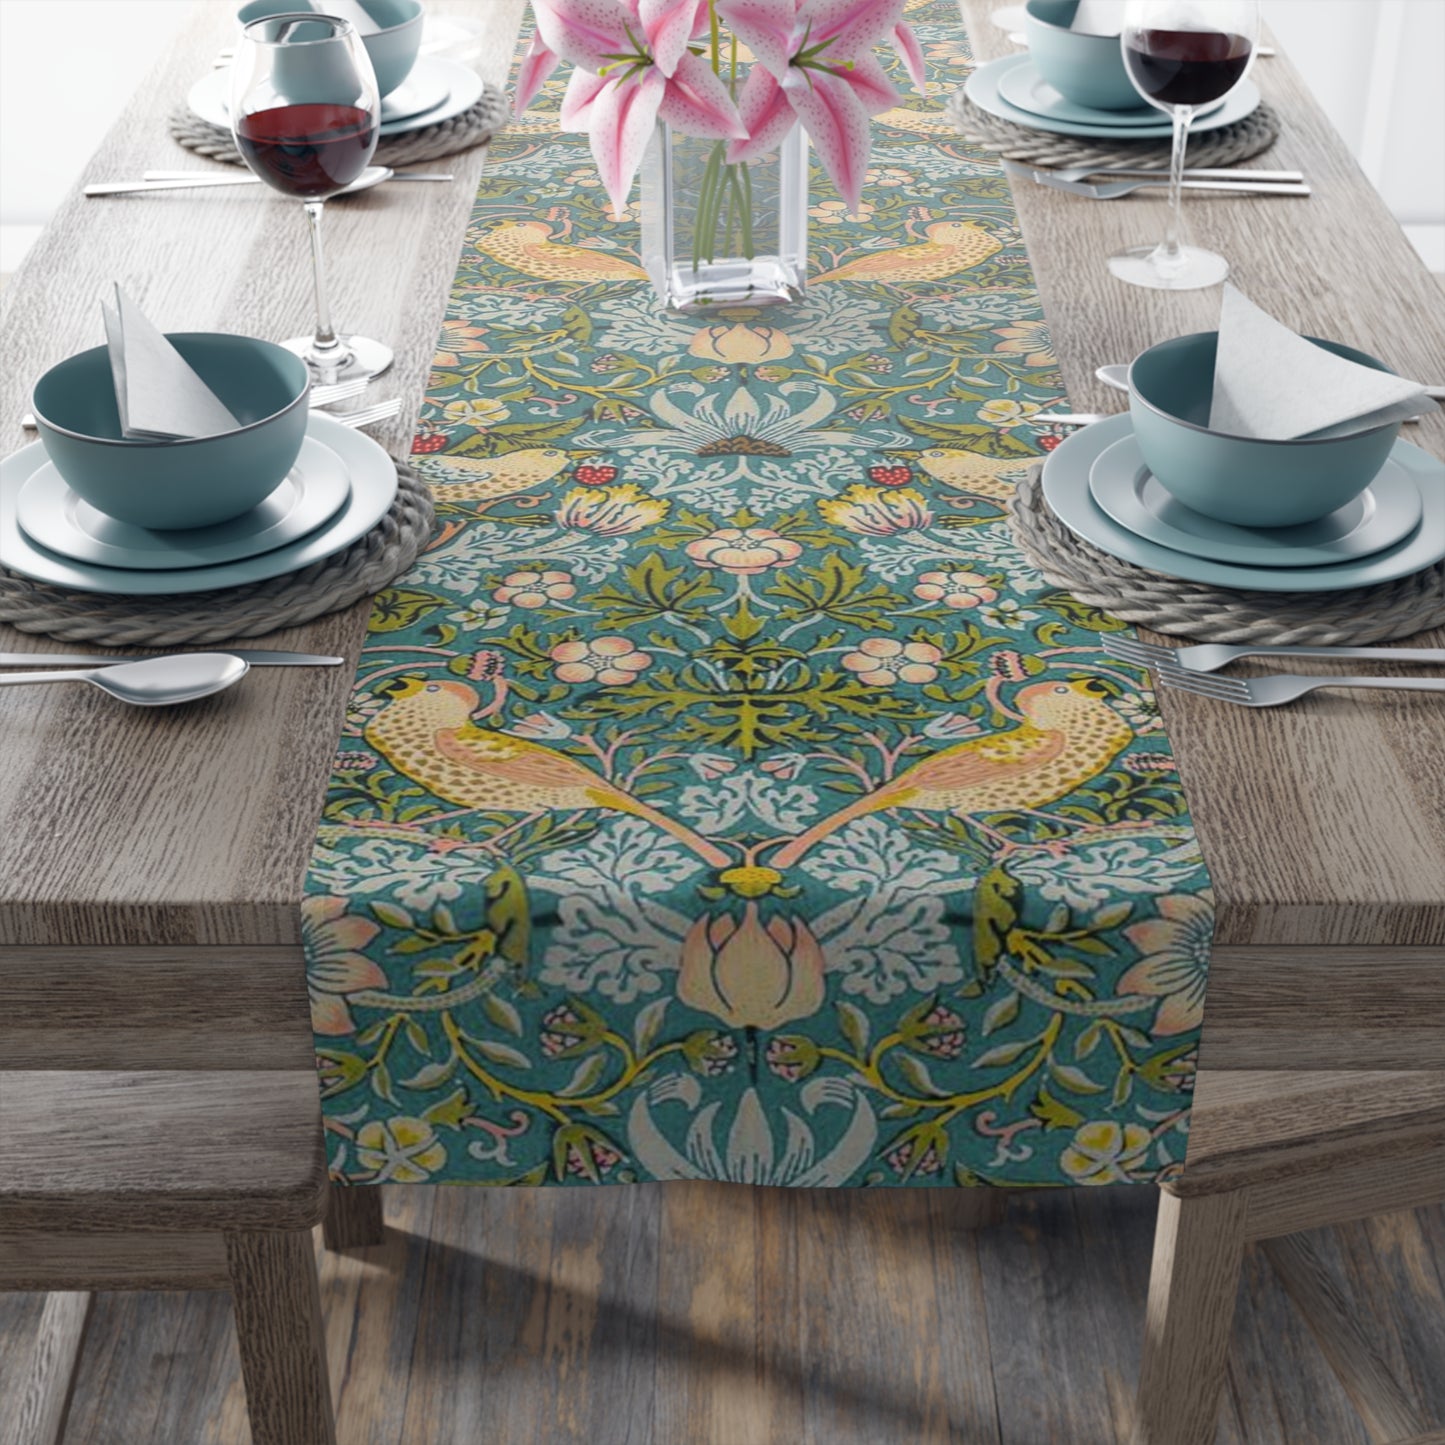 william-morris-co-table-runner-strawberry-thief-collection-duck-egg-blue-5